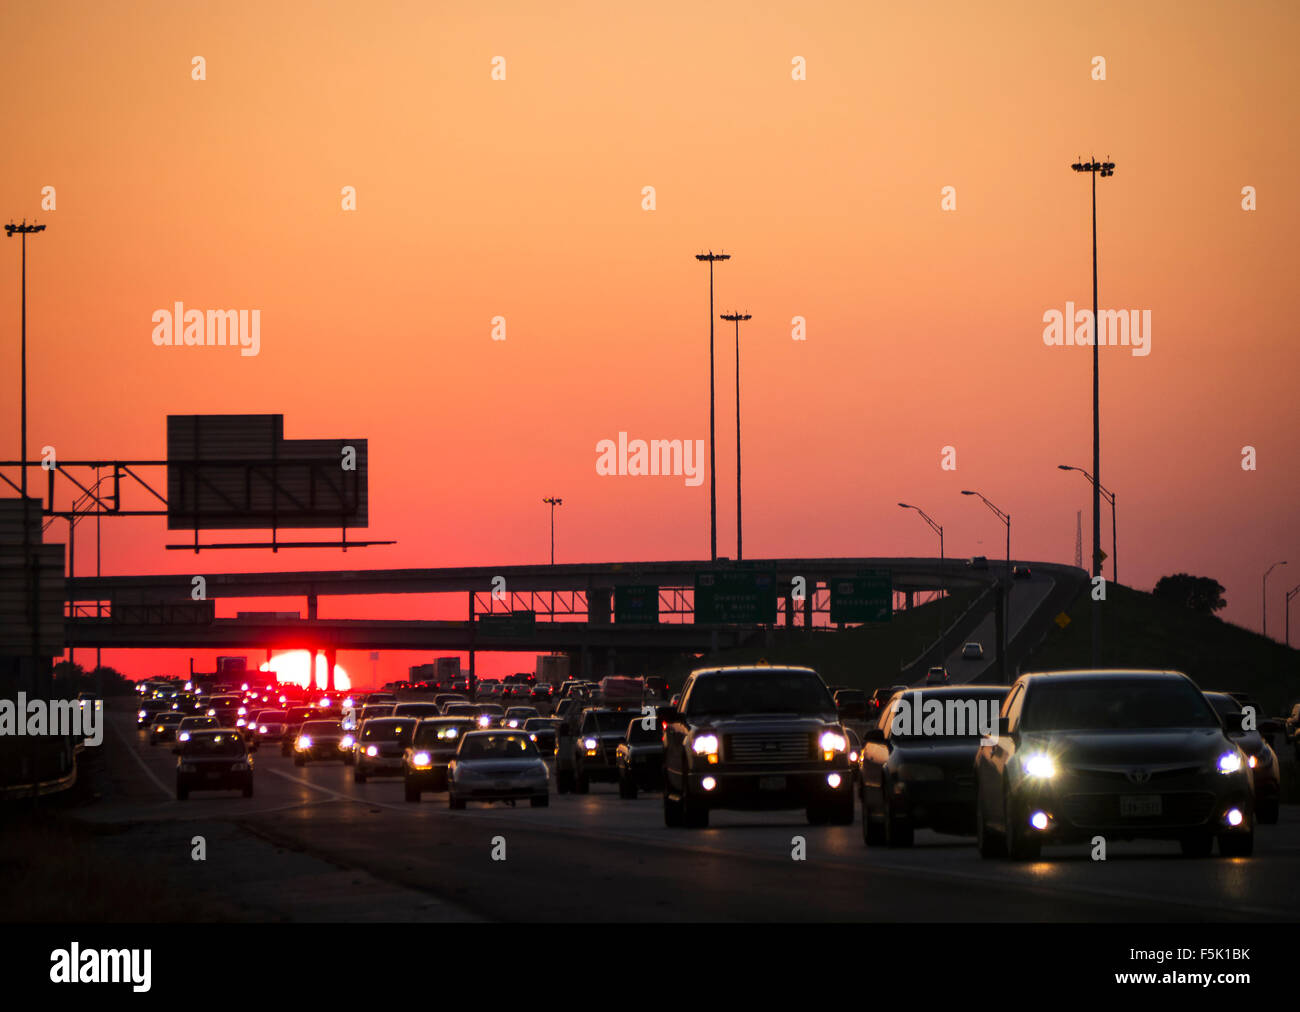 It's a long day fighting traffic to  get home after work. Bumper to bumper traffic on a major freeway as the sun sets in the West. Stock Photo